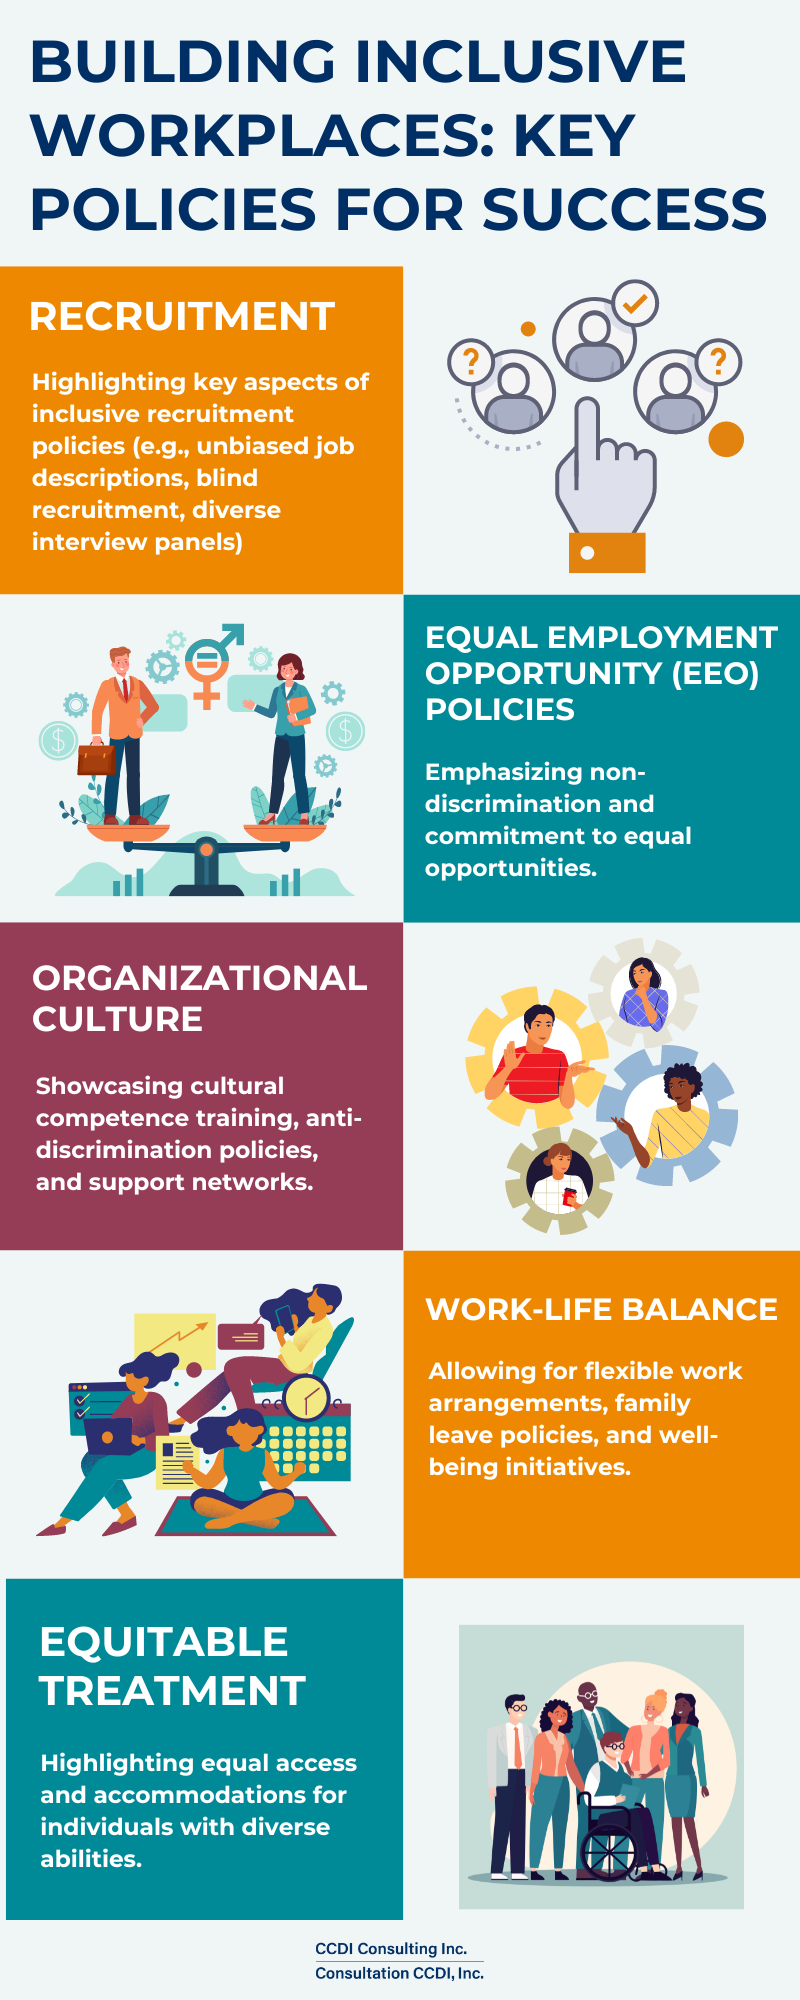 Building Inclusive Workplaces Key Policies for Success